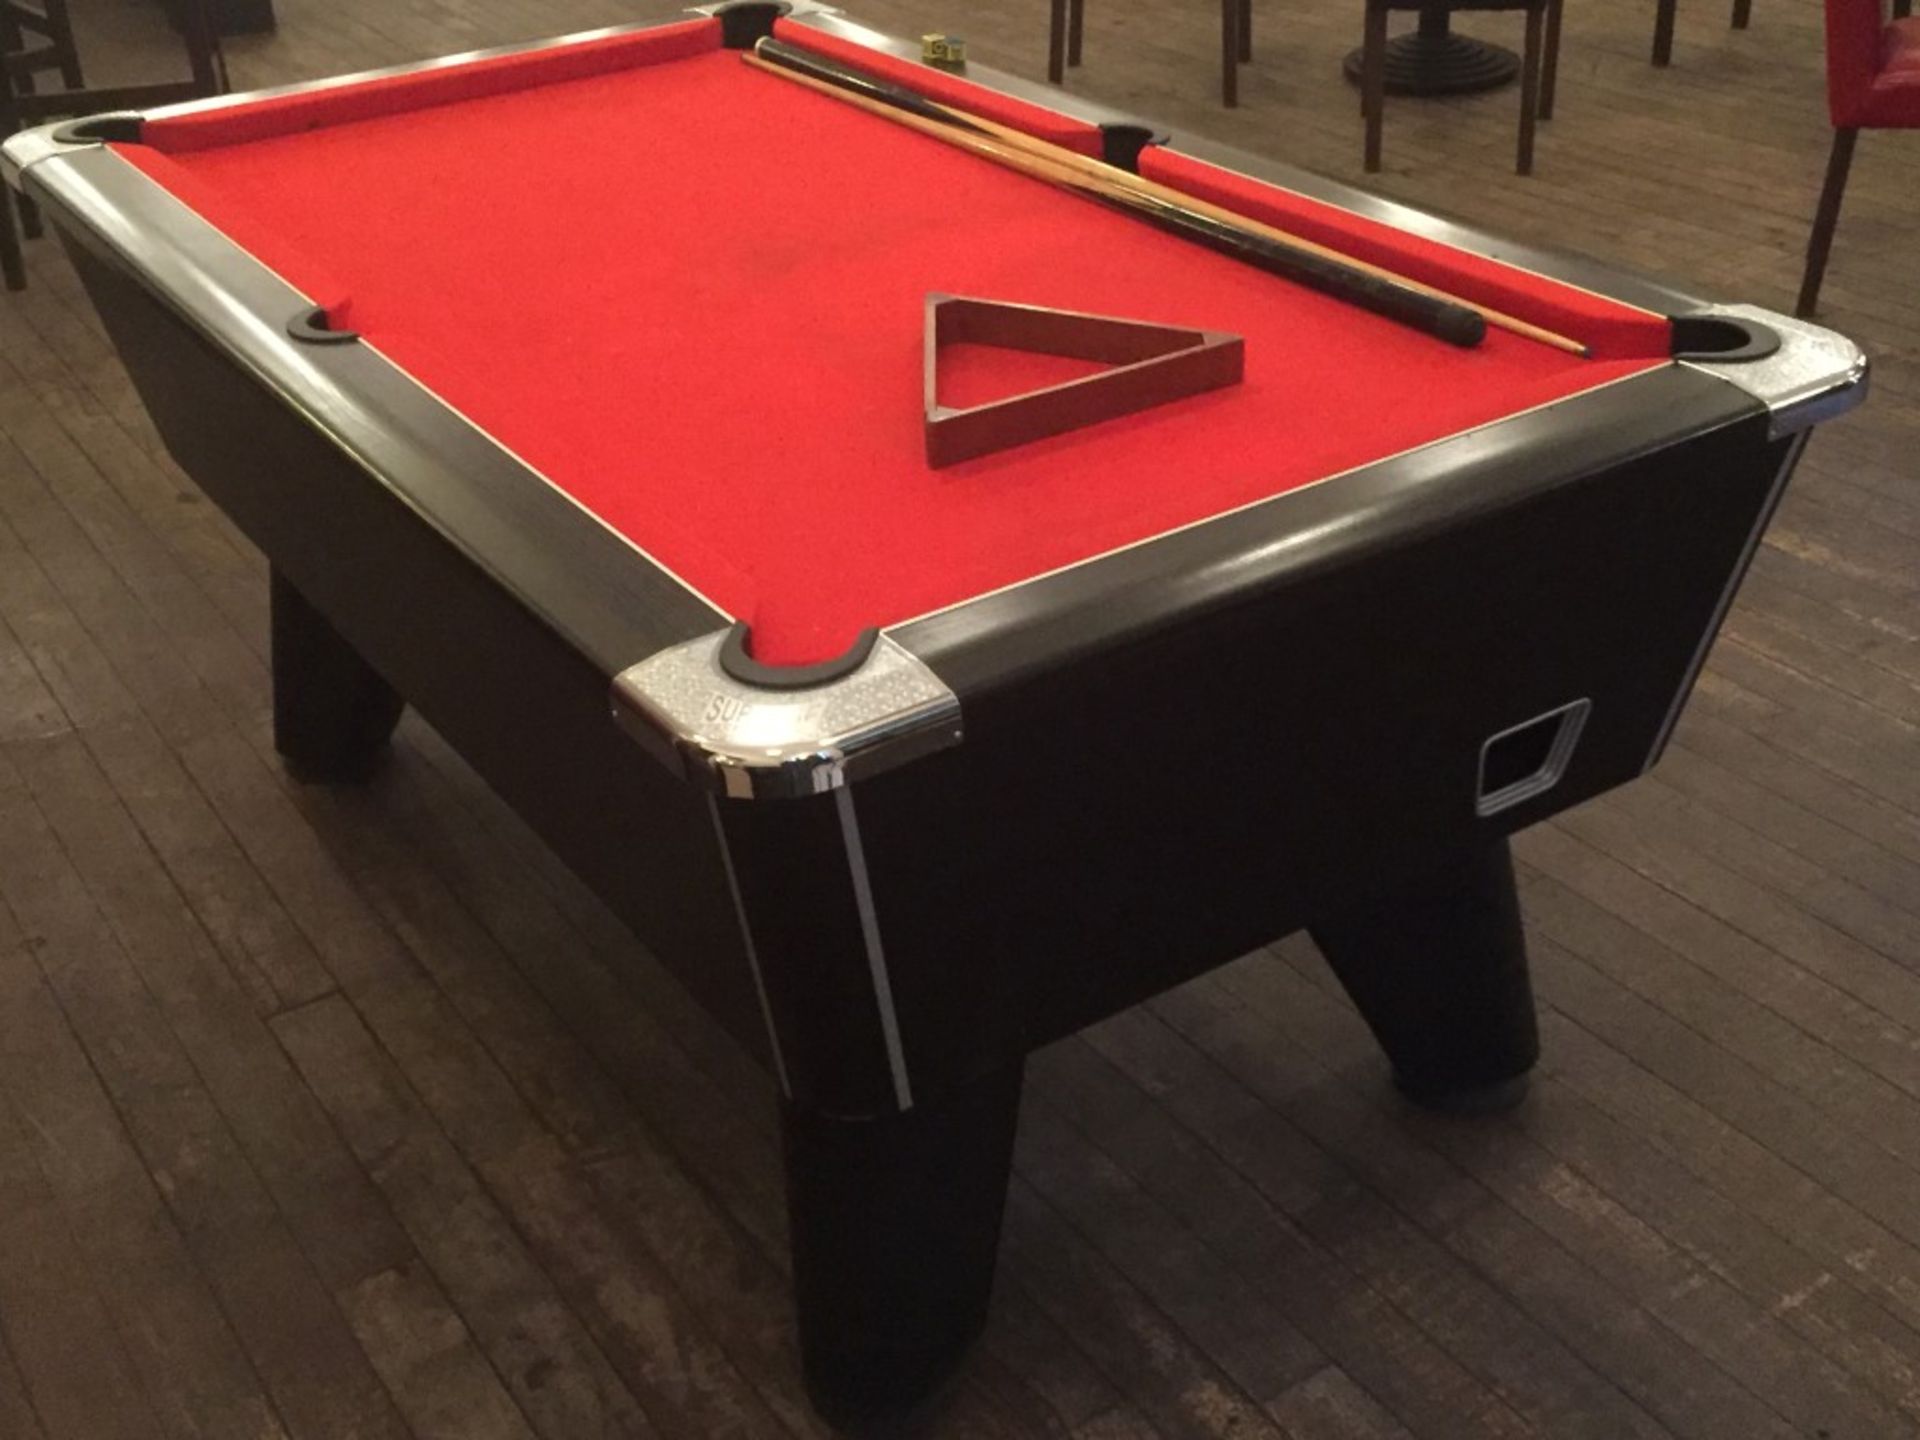 1 x Supreme "Winner" 6ft Commercial Coin-Operated Pool Table - Includes Balls, Triangle And 2 Cues -